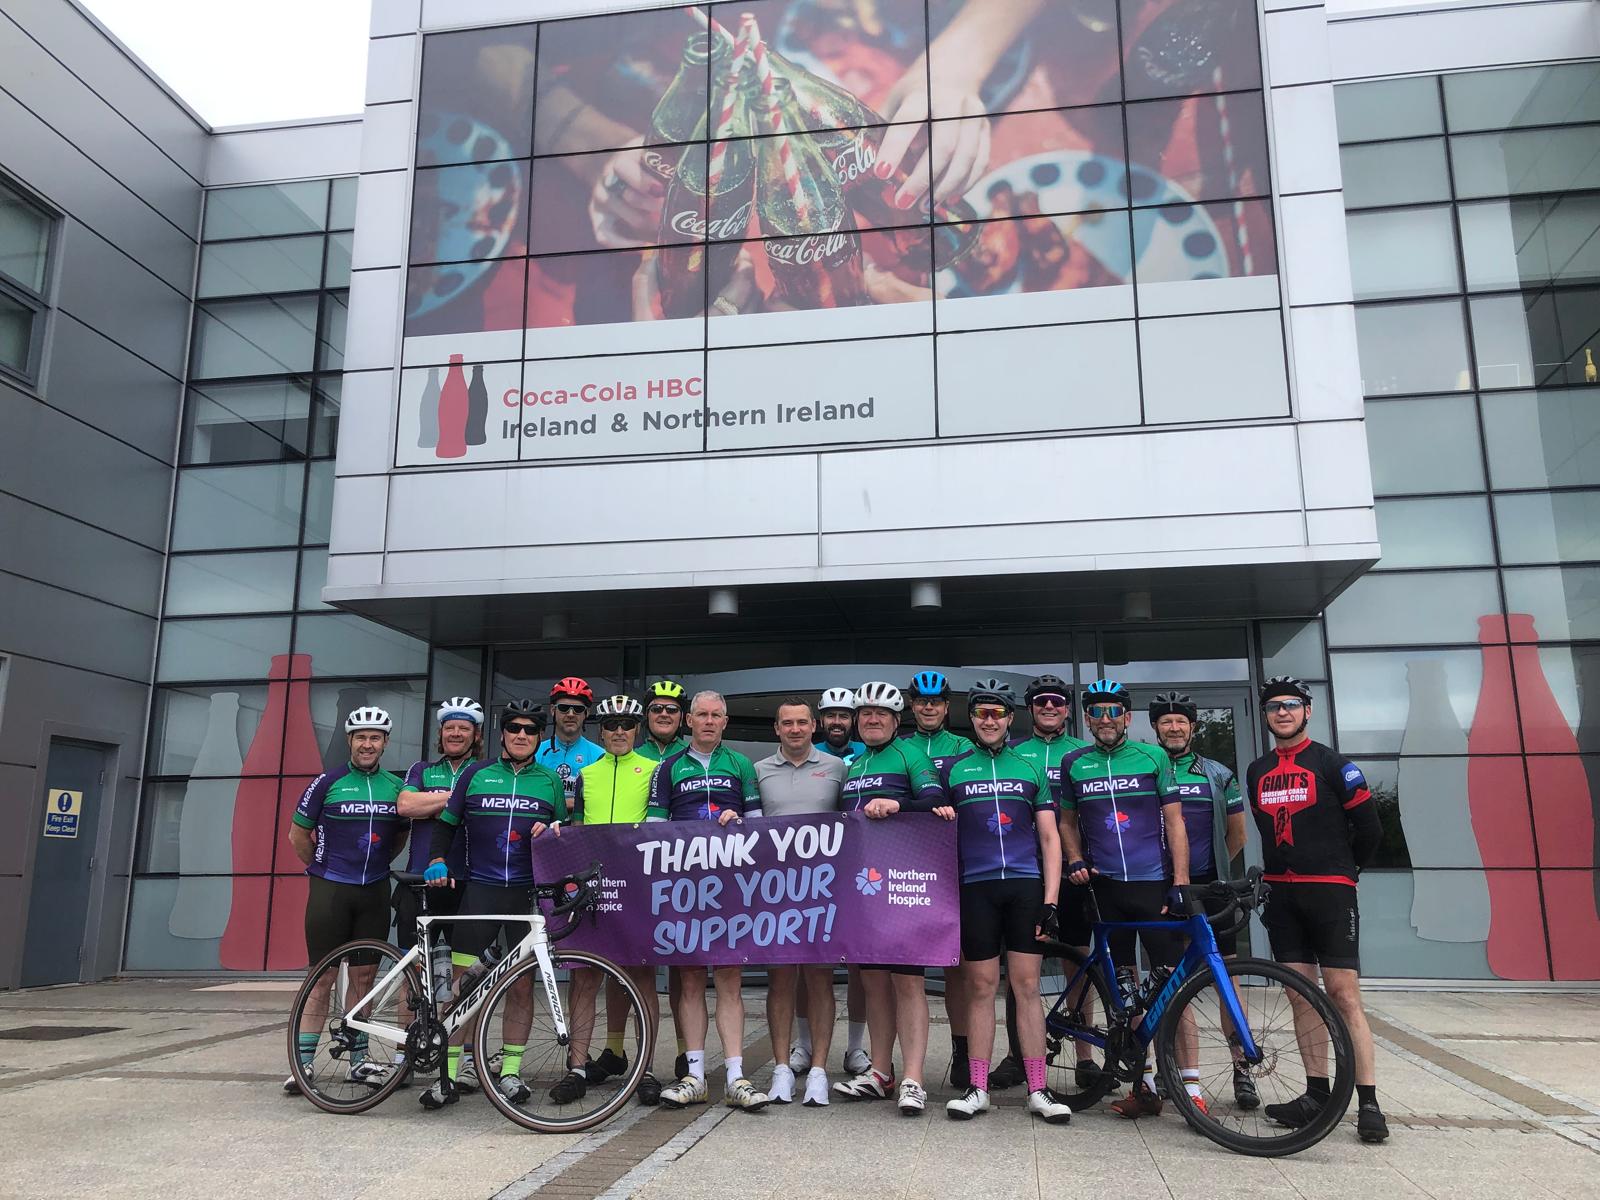 CHALLENGE READY: The team involved in the Mizen Head to Malin Head cycle